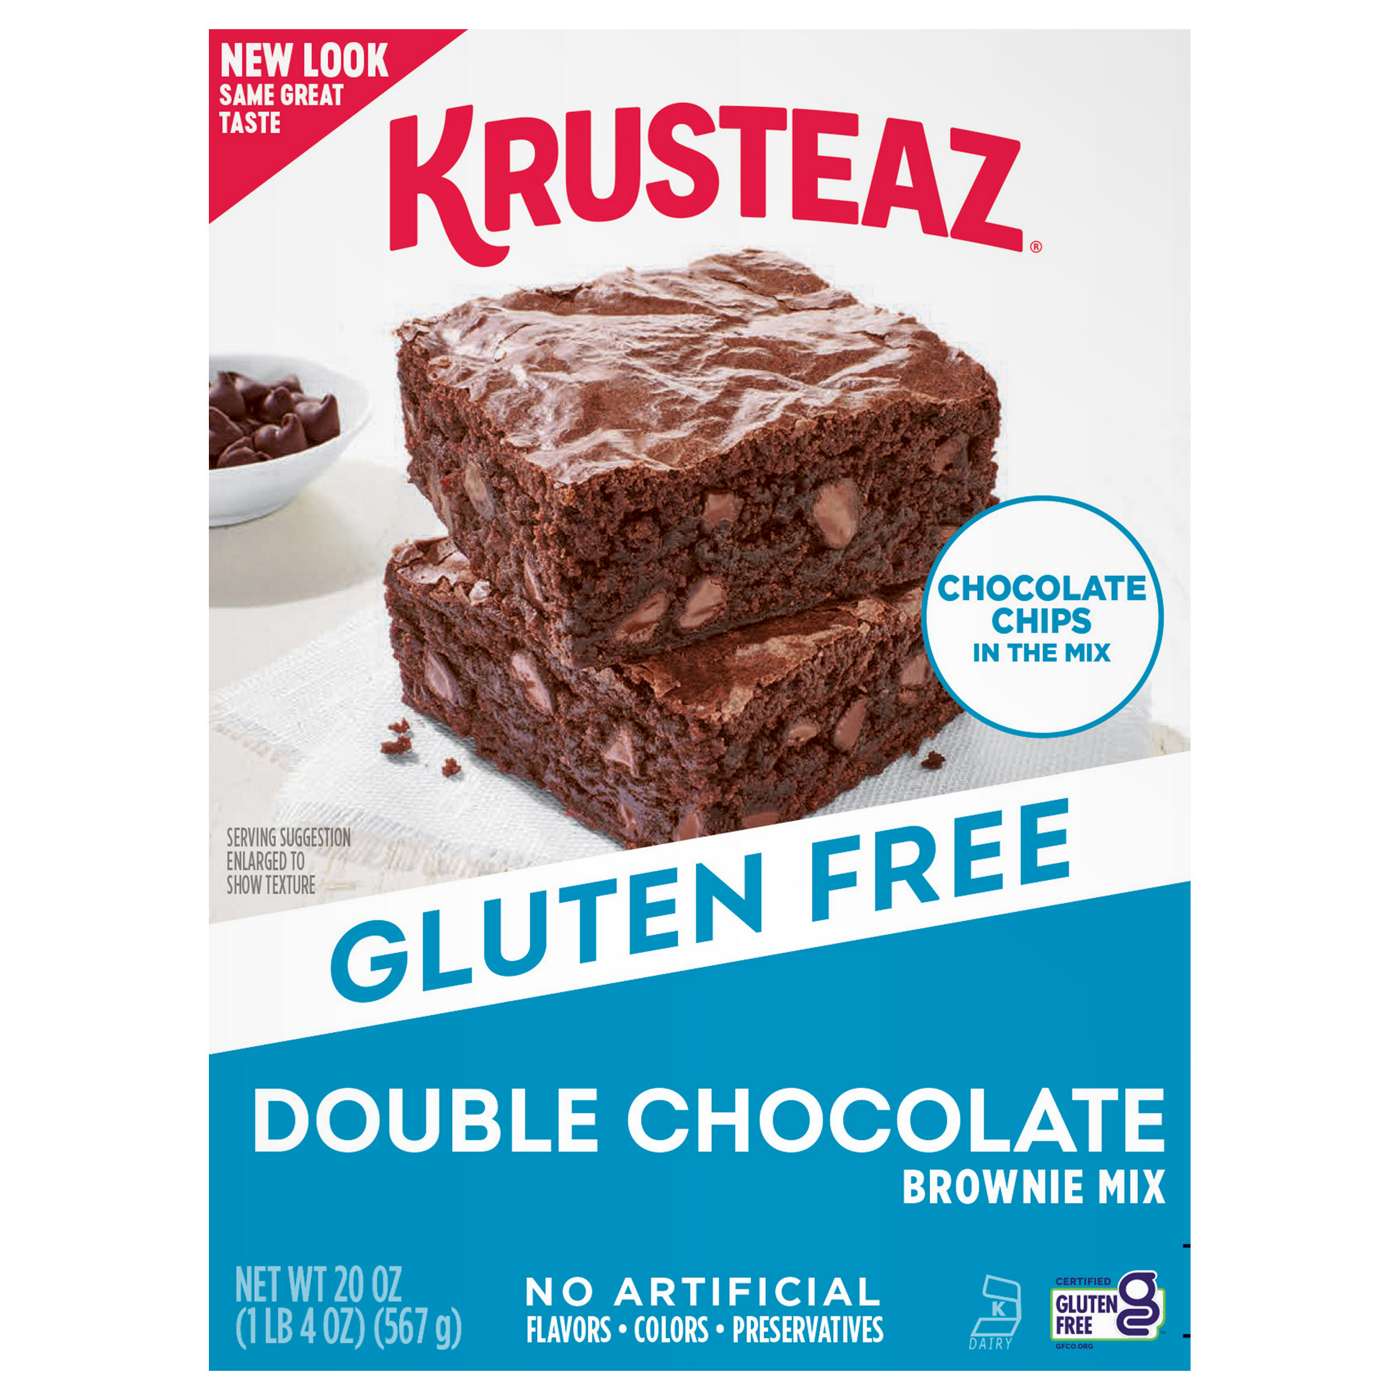 Krusteaz Gluten Free Double Chocolate Brownie Mix; image 1 of 7